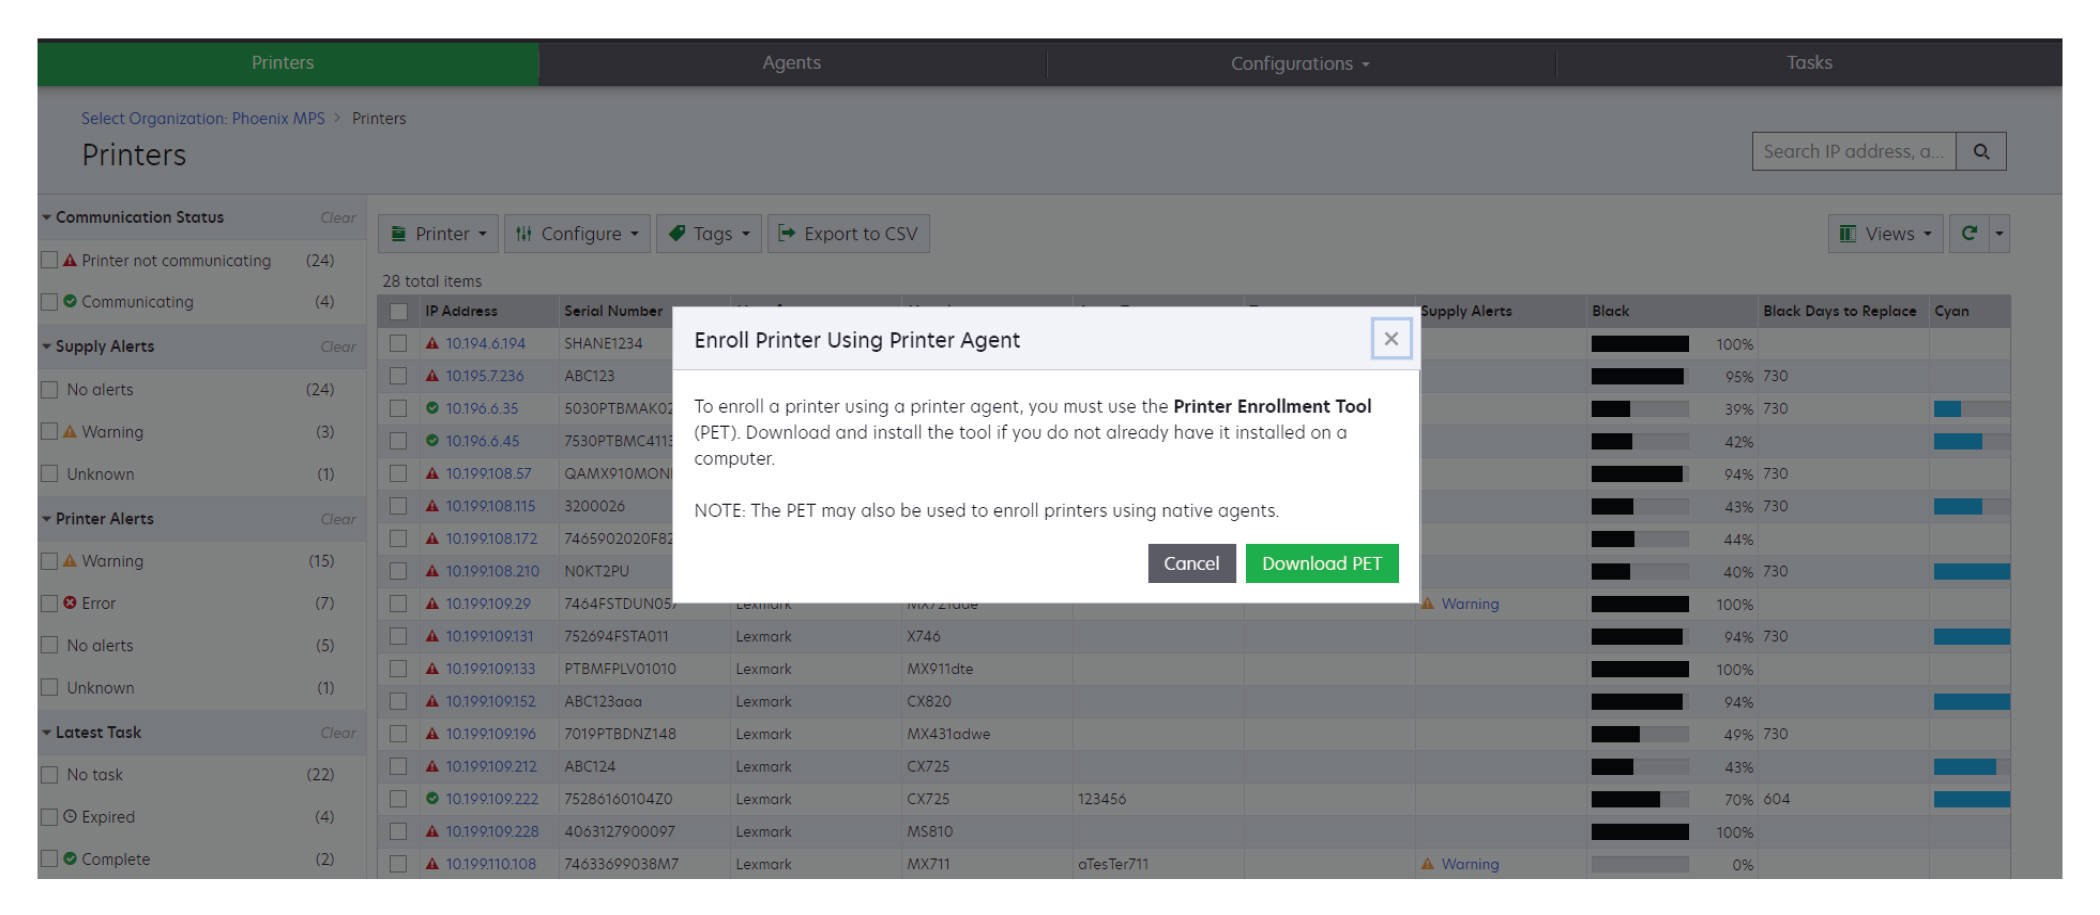 A screenshot showing how to download the Printer Enrollment Tool using the Agents tab of the Fleet Management web portal